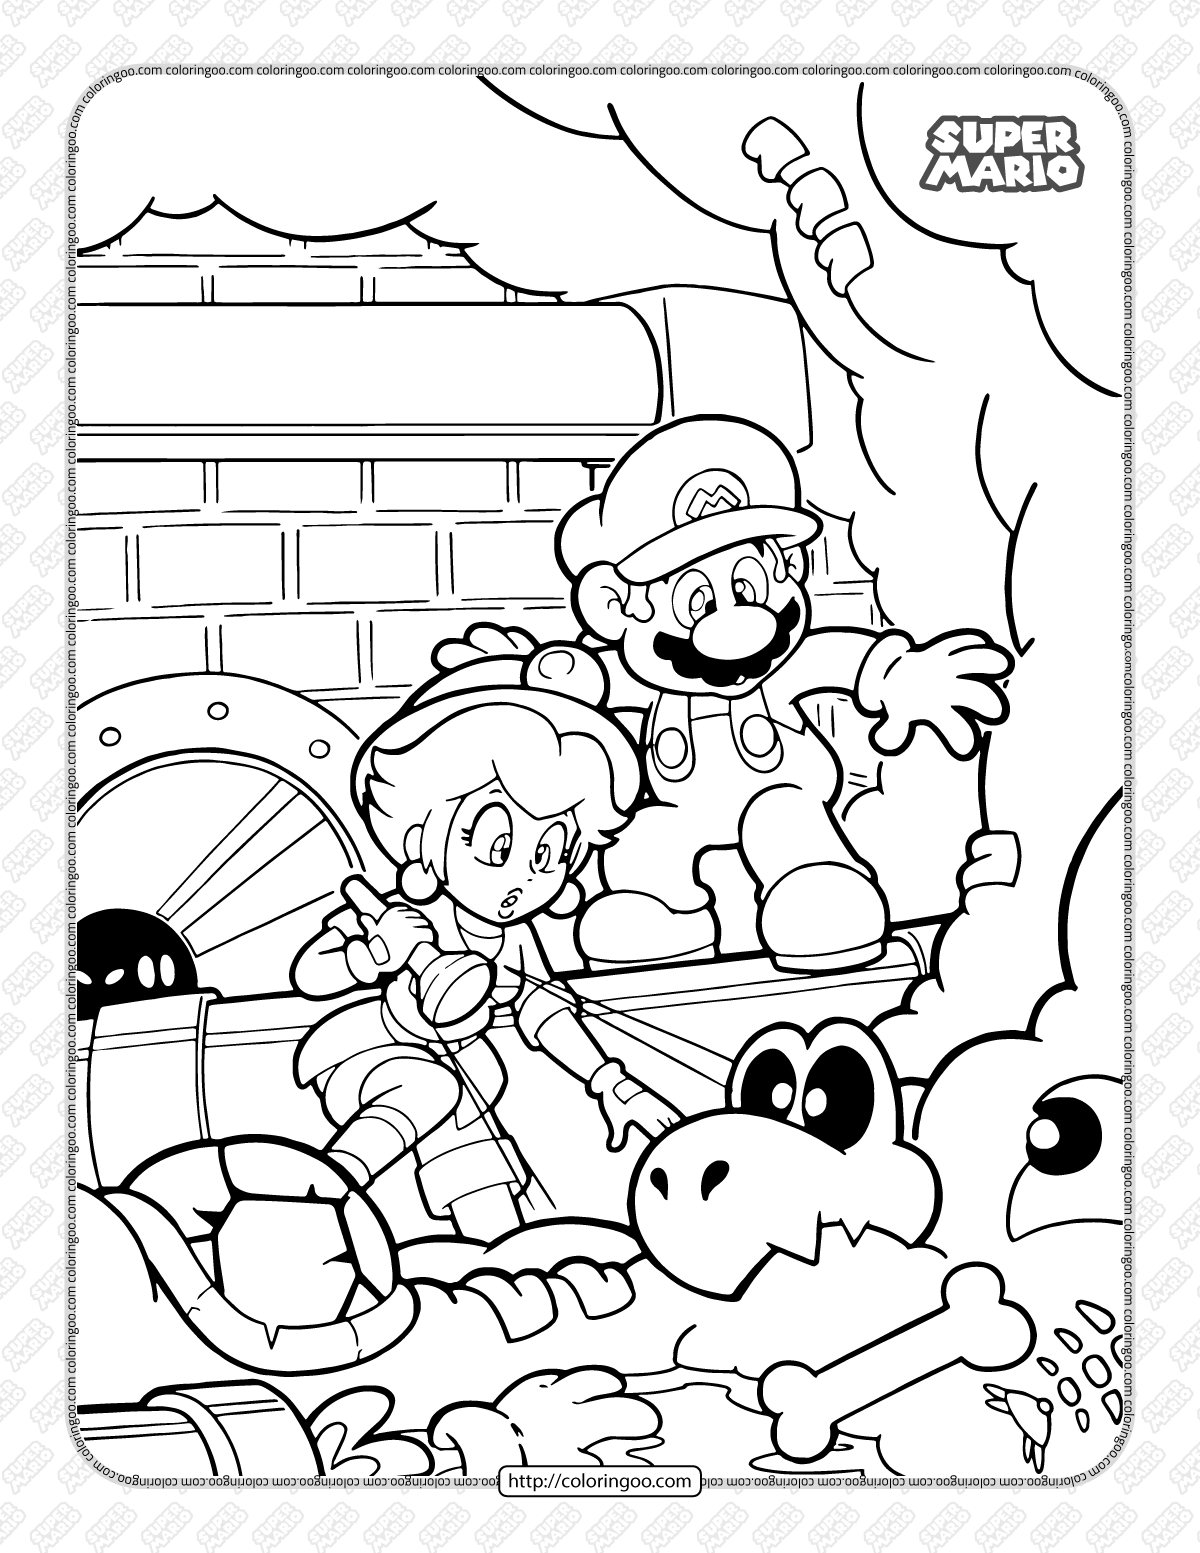 Super Mario Coloring Pages: 123 Adventures to Bring to Life with Color 117